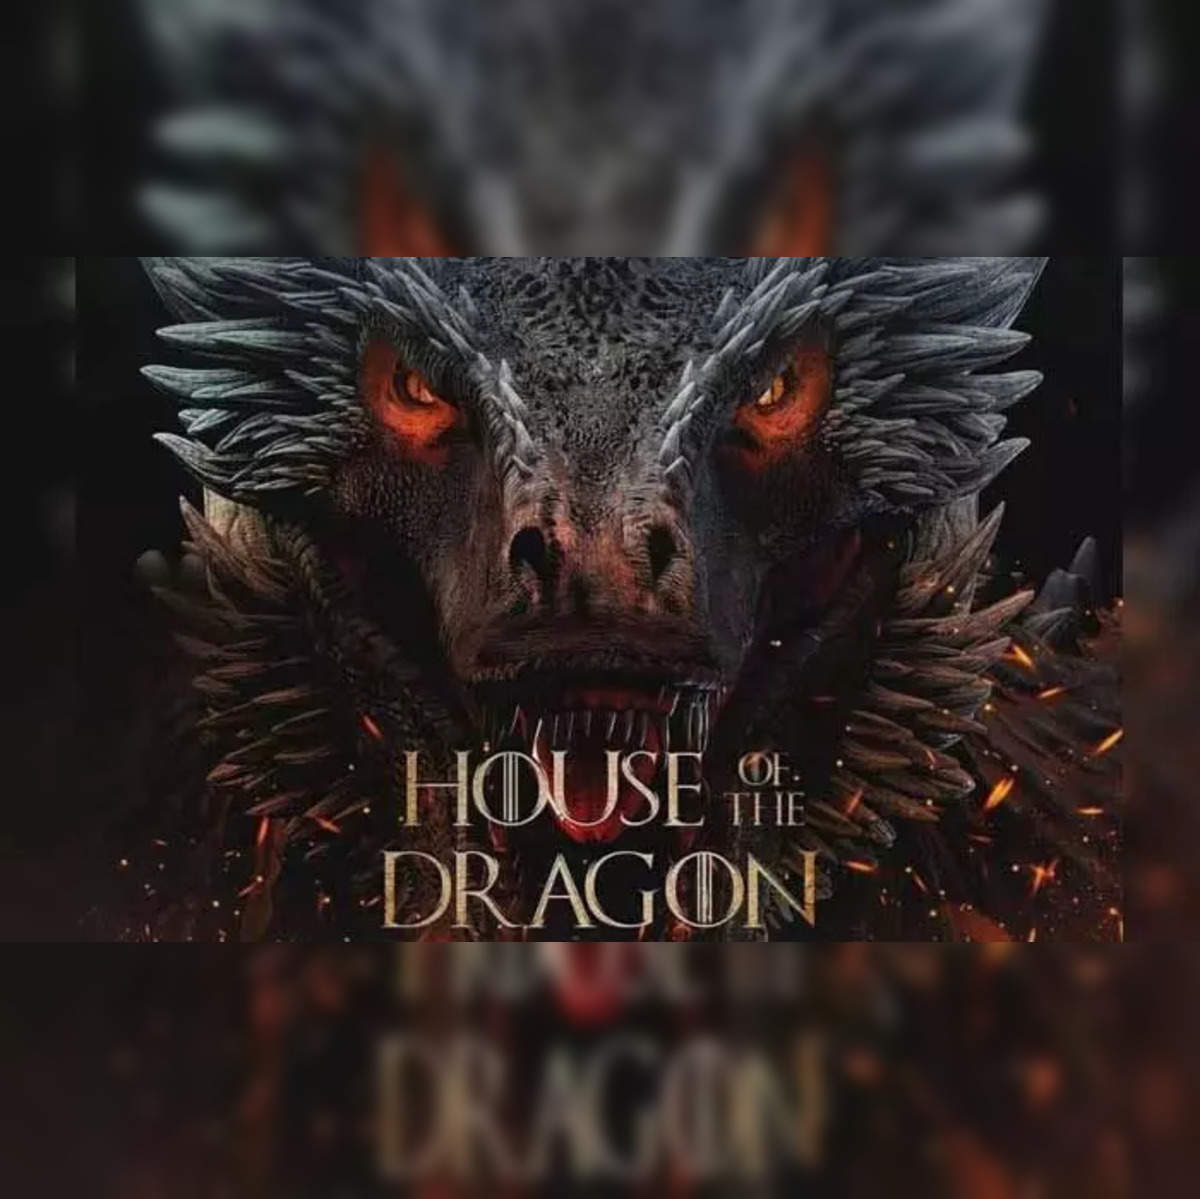 Introducing the House of the Dragon Exclusive Fan Experience